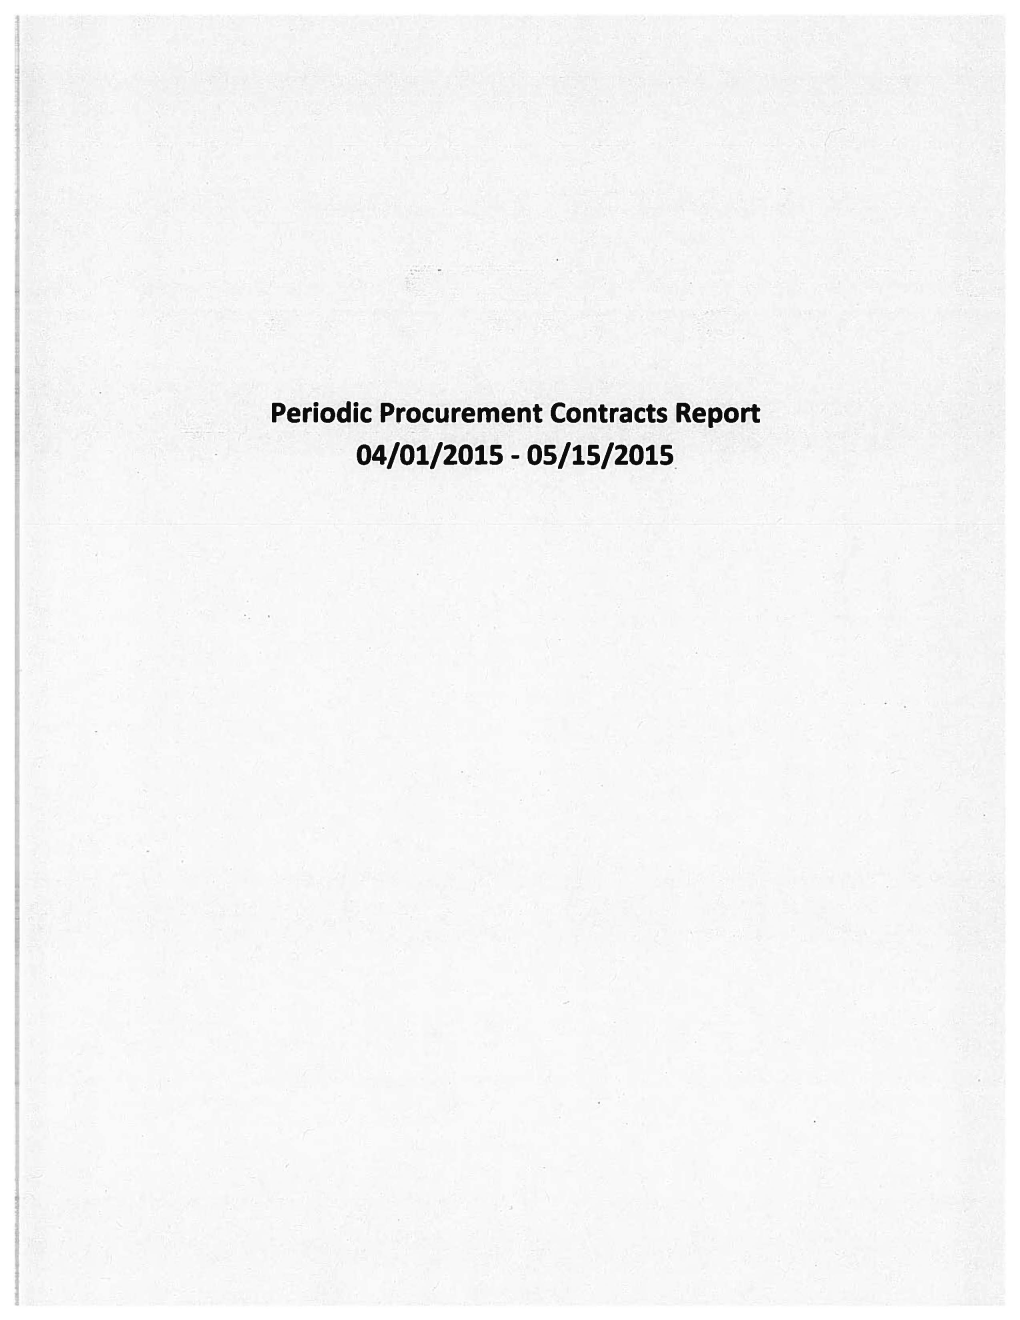 Periodic Procurement Contracts Report May 2015